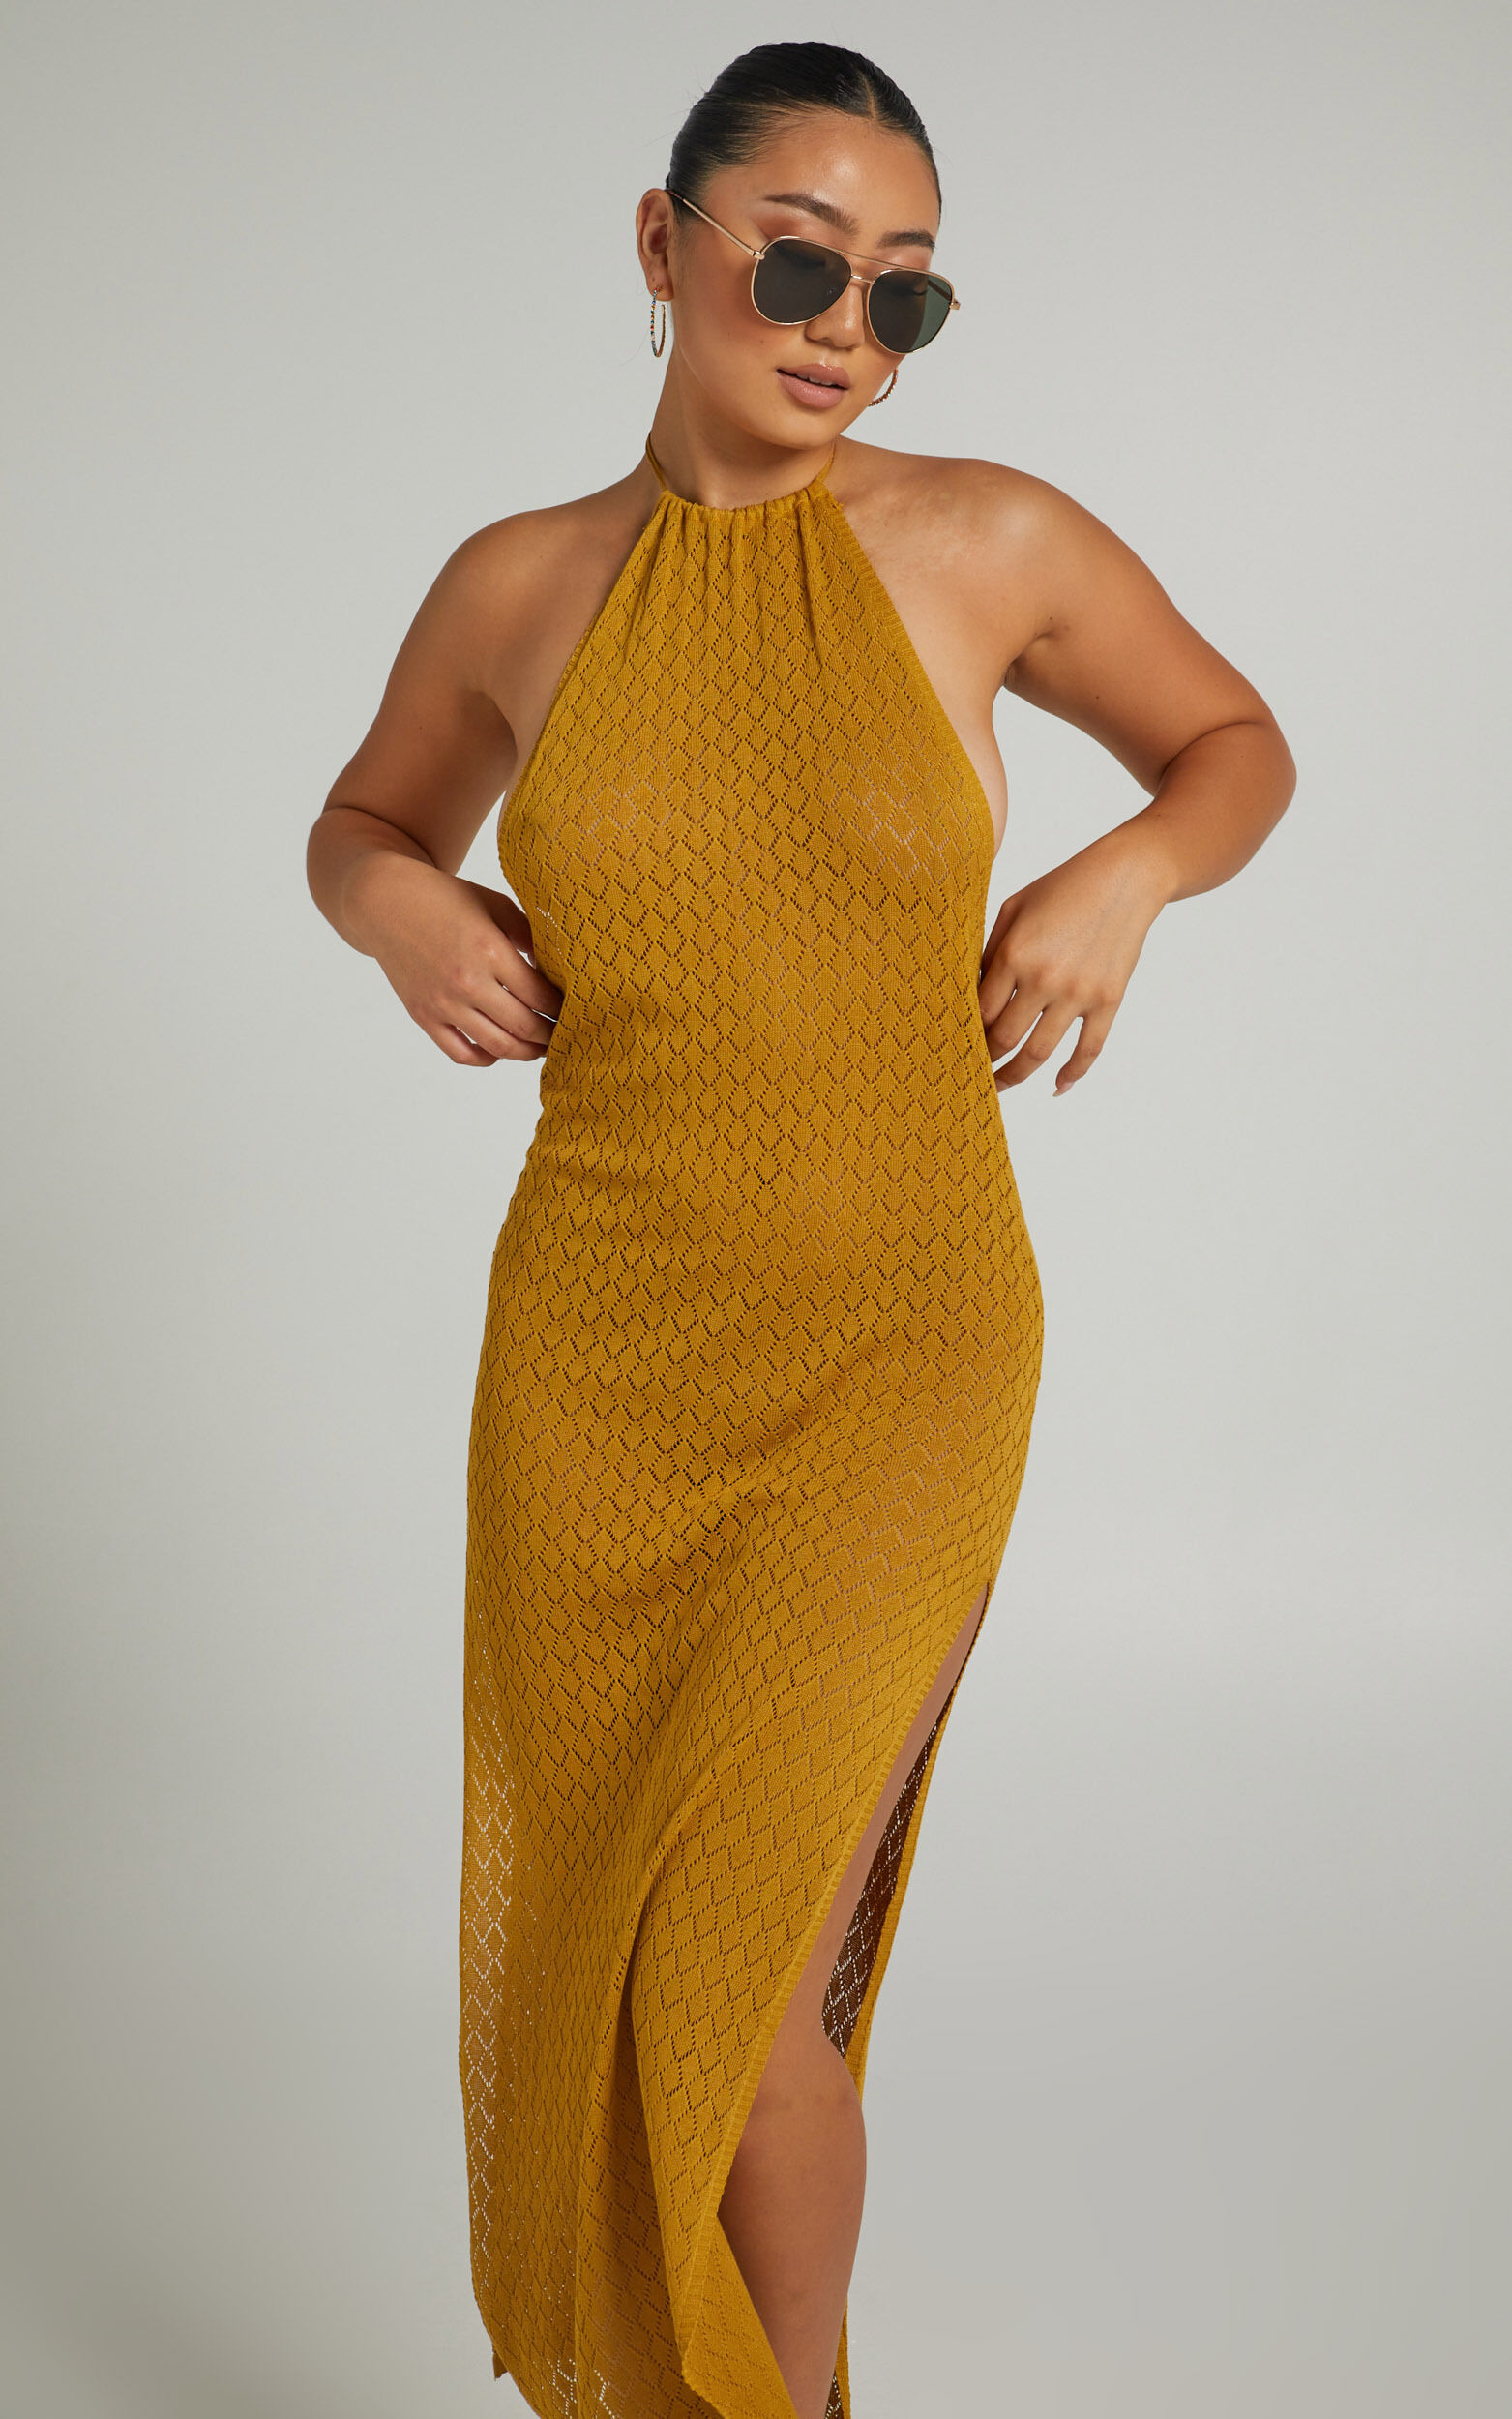 Salmee Knit Maxi Dress in Mustard - S, YEL1, super-hi-res image number null